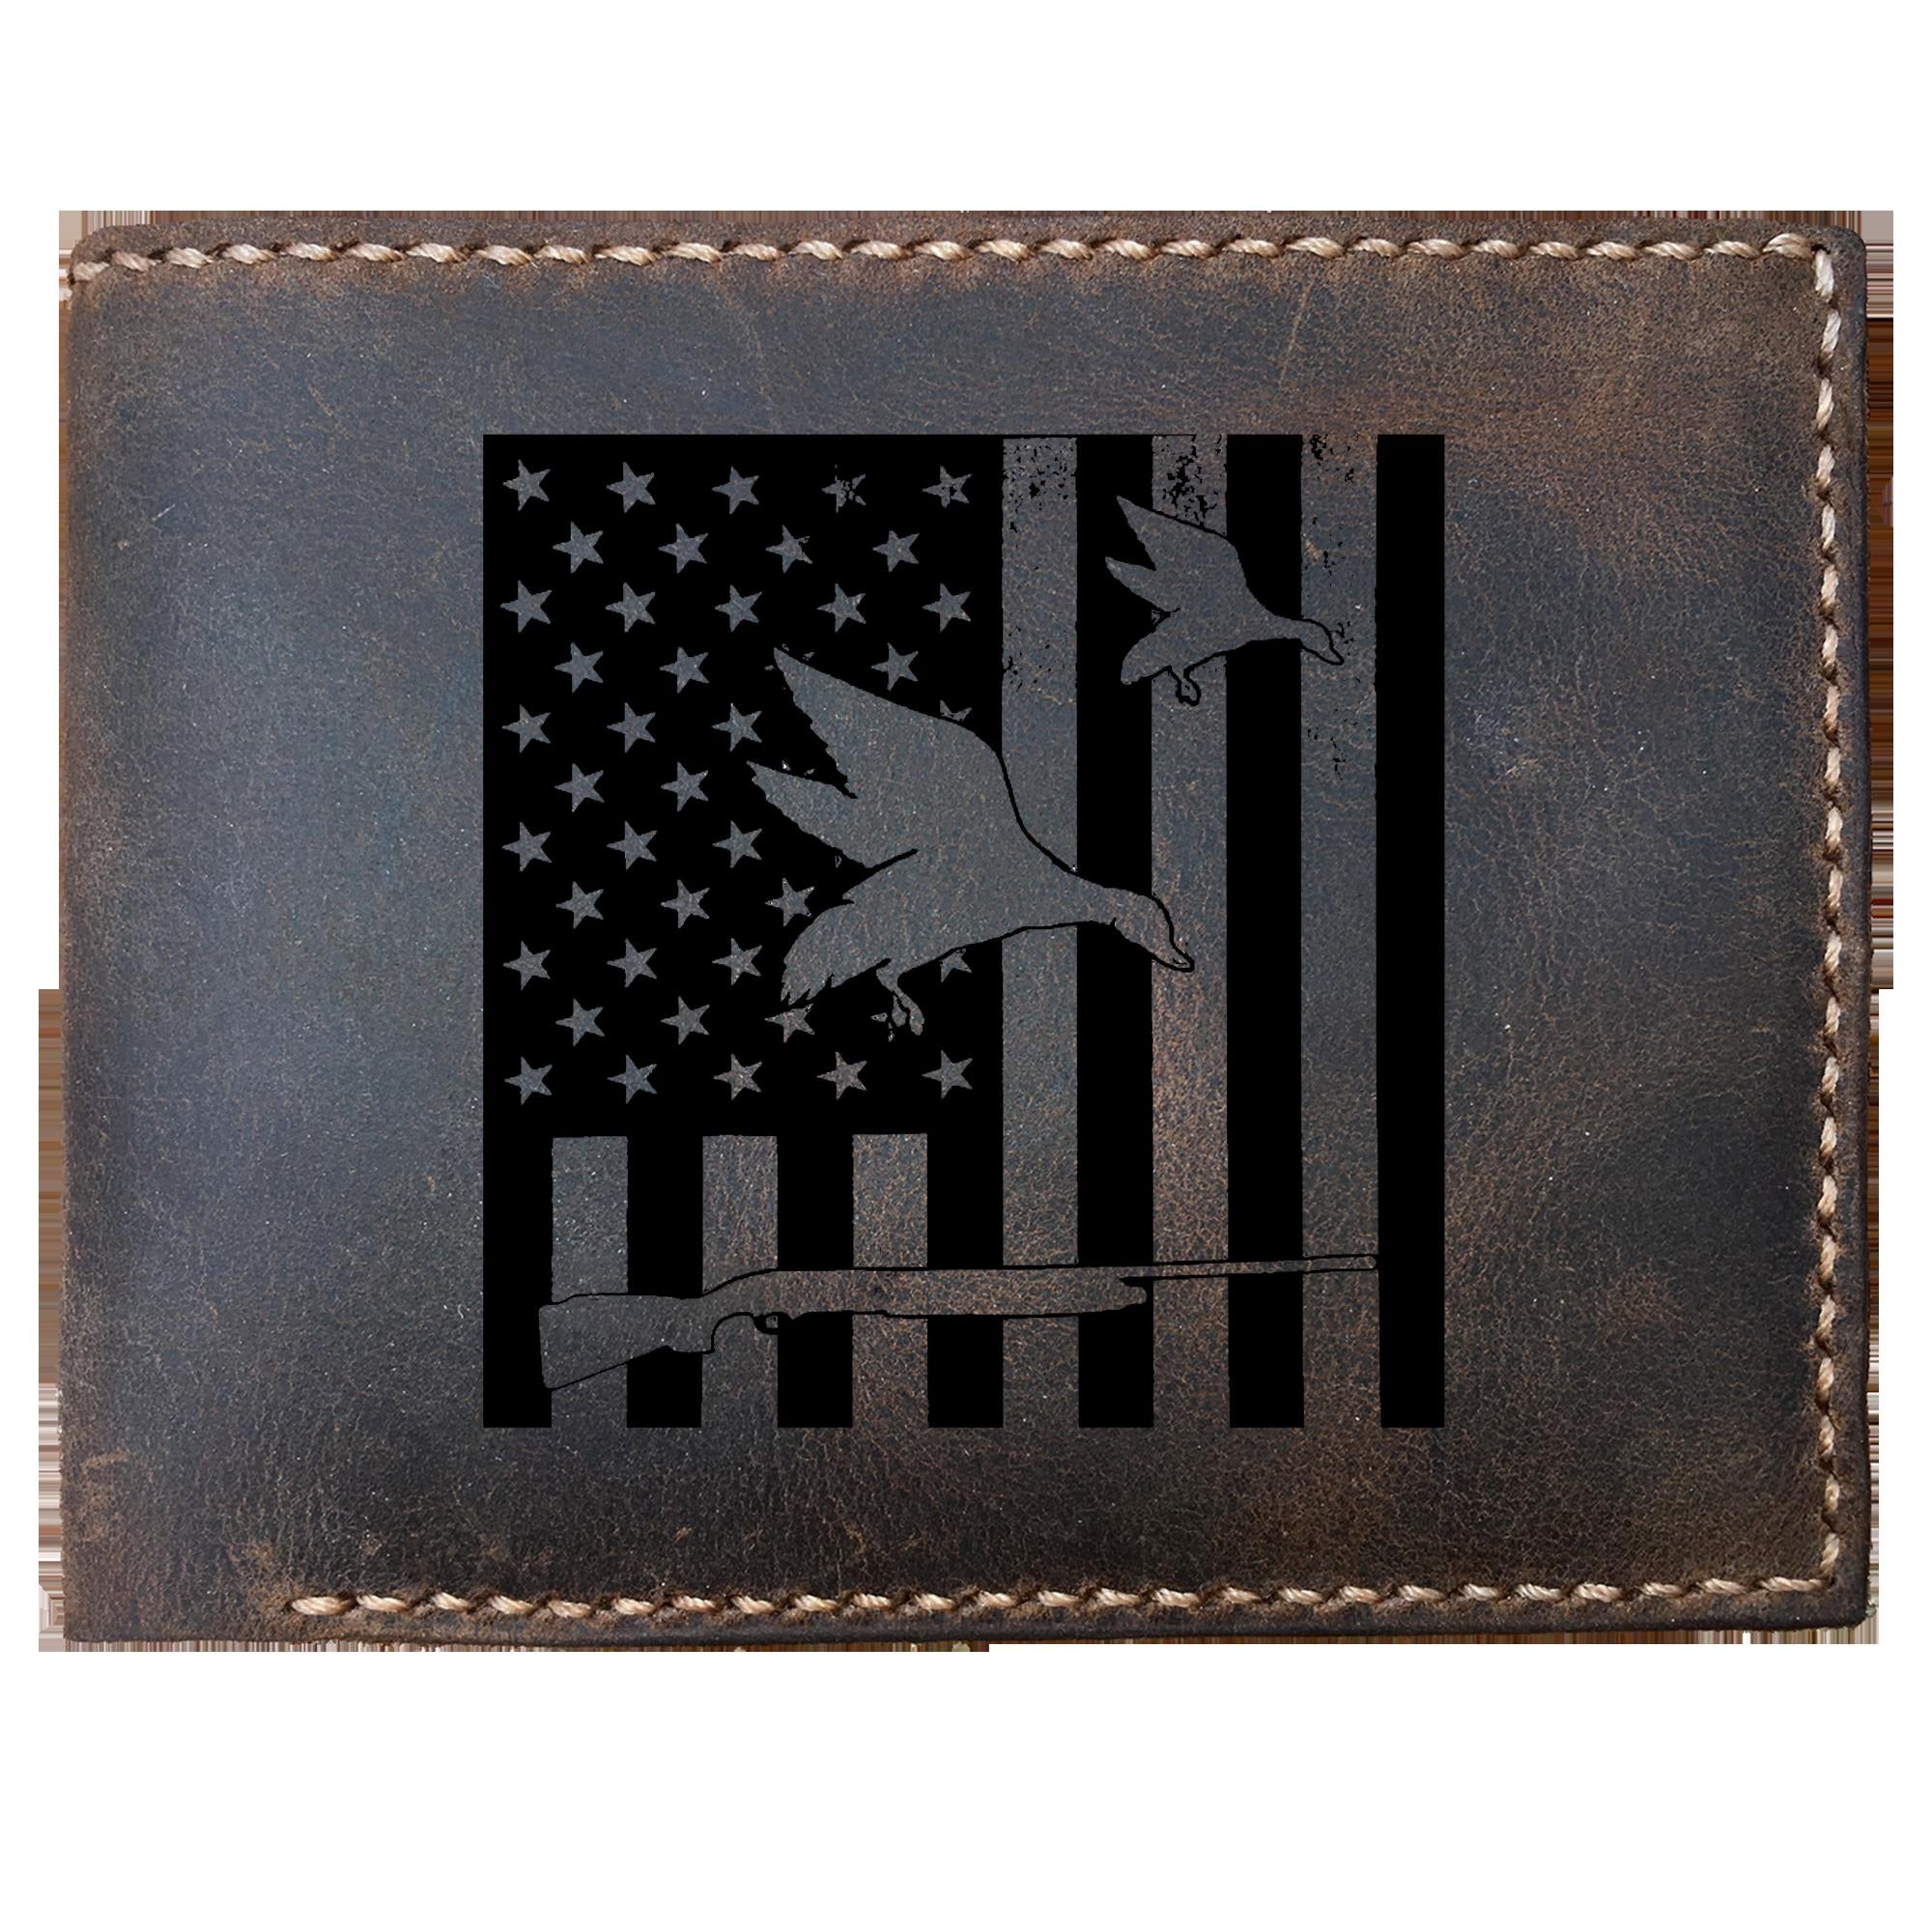 Skitongifts Funny Custom Laser Engraved Bifold Leather Wallet For Men, Duck Hunt Hunting